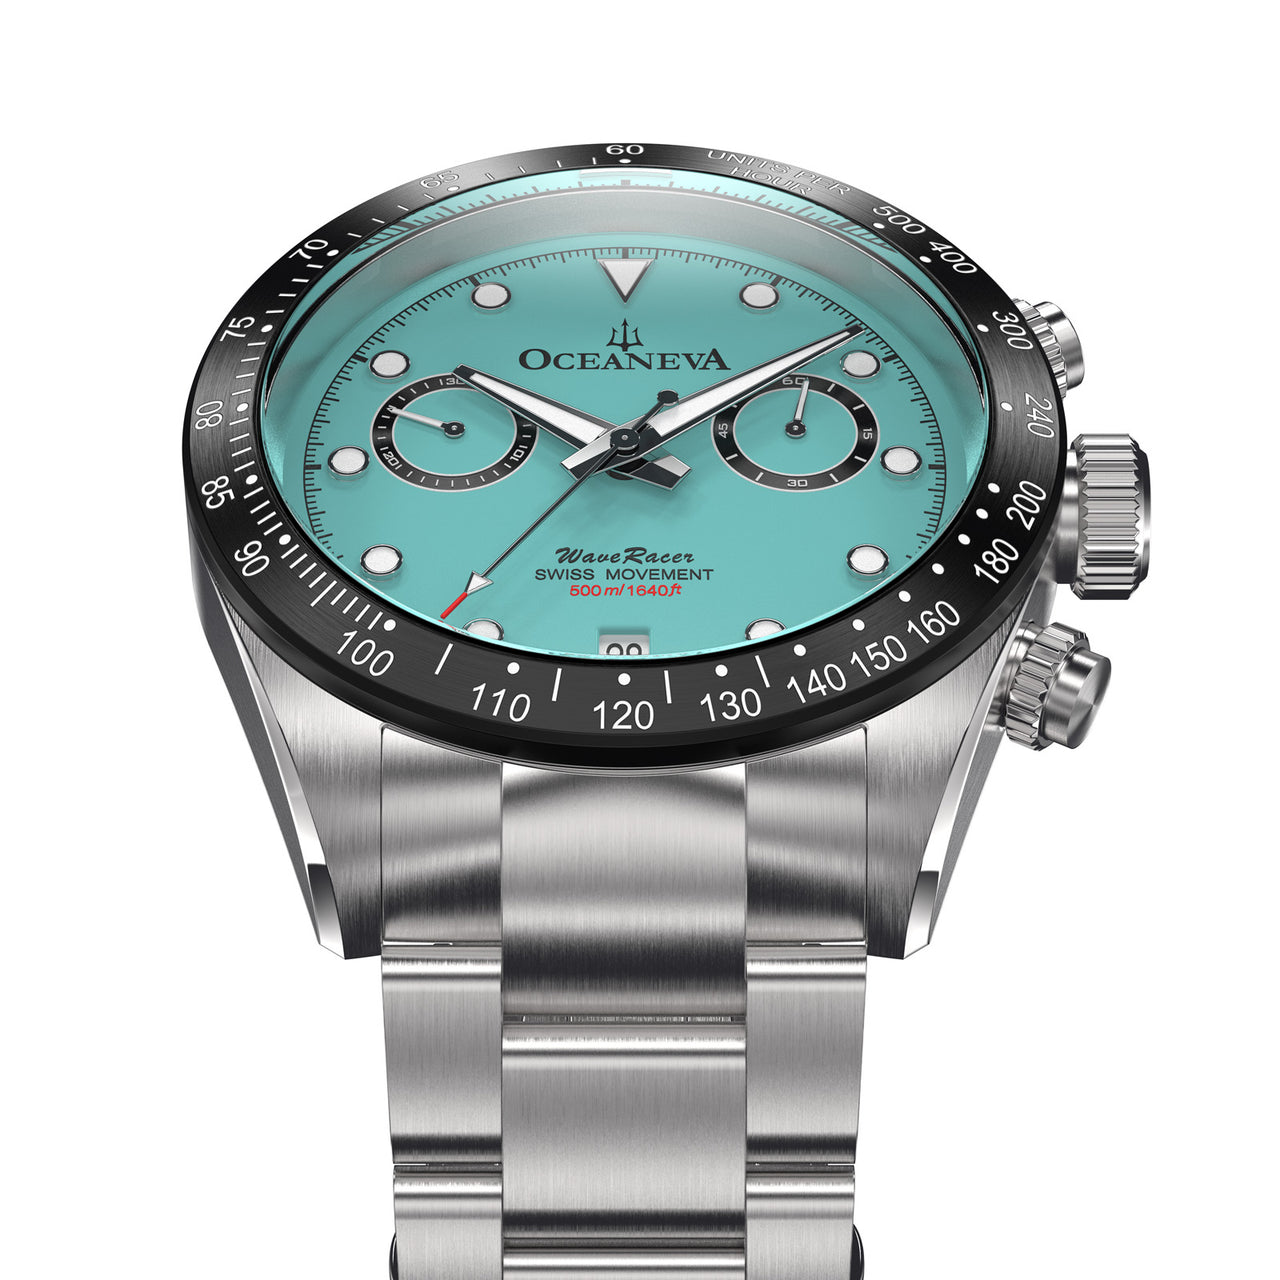 Oceaneva Mint Dial Chronograph Watch Frontal View Picture